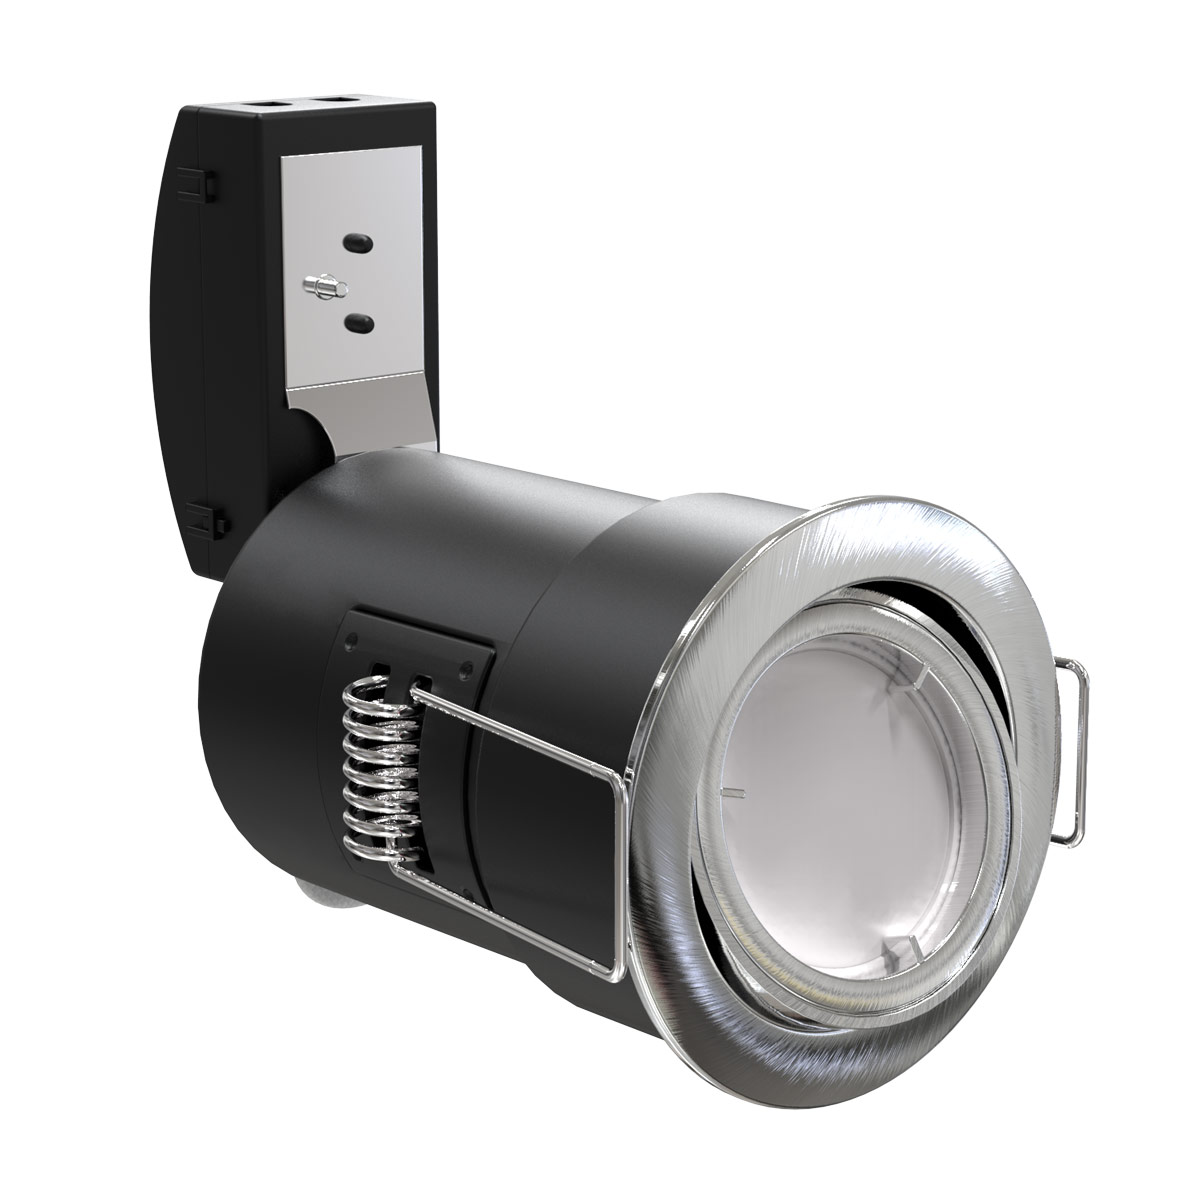 View Brushed Chrome Adjustable GU10 FireRated Downlight information